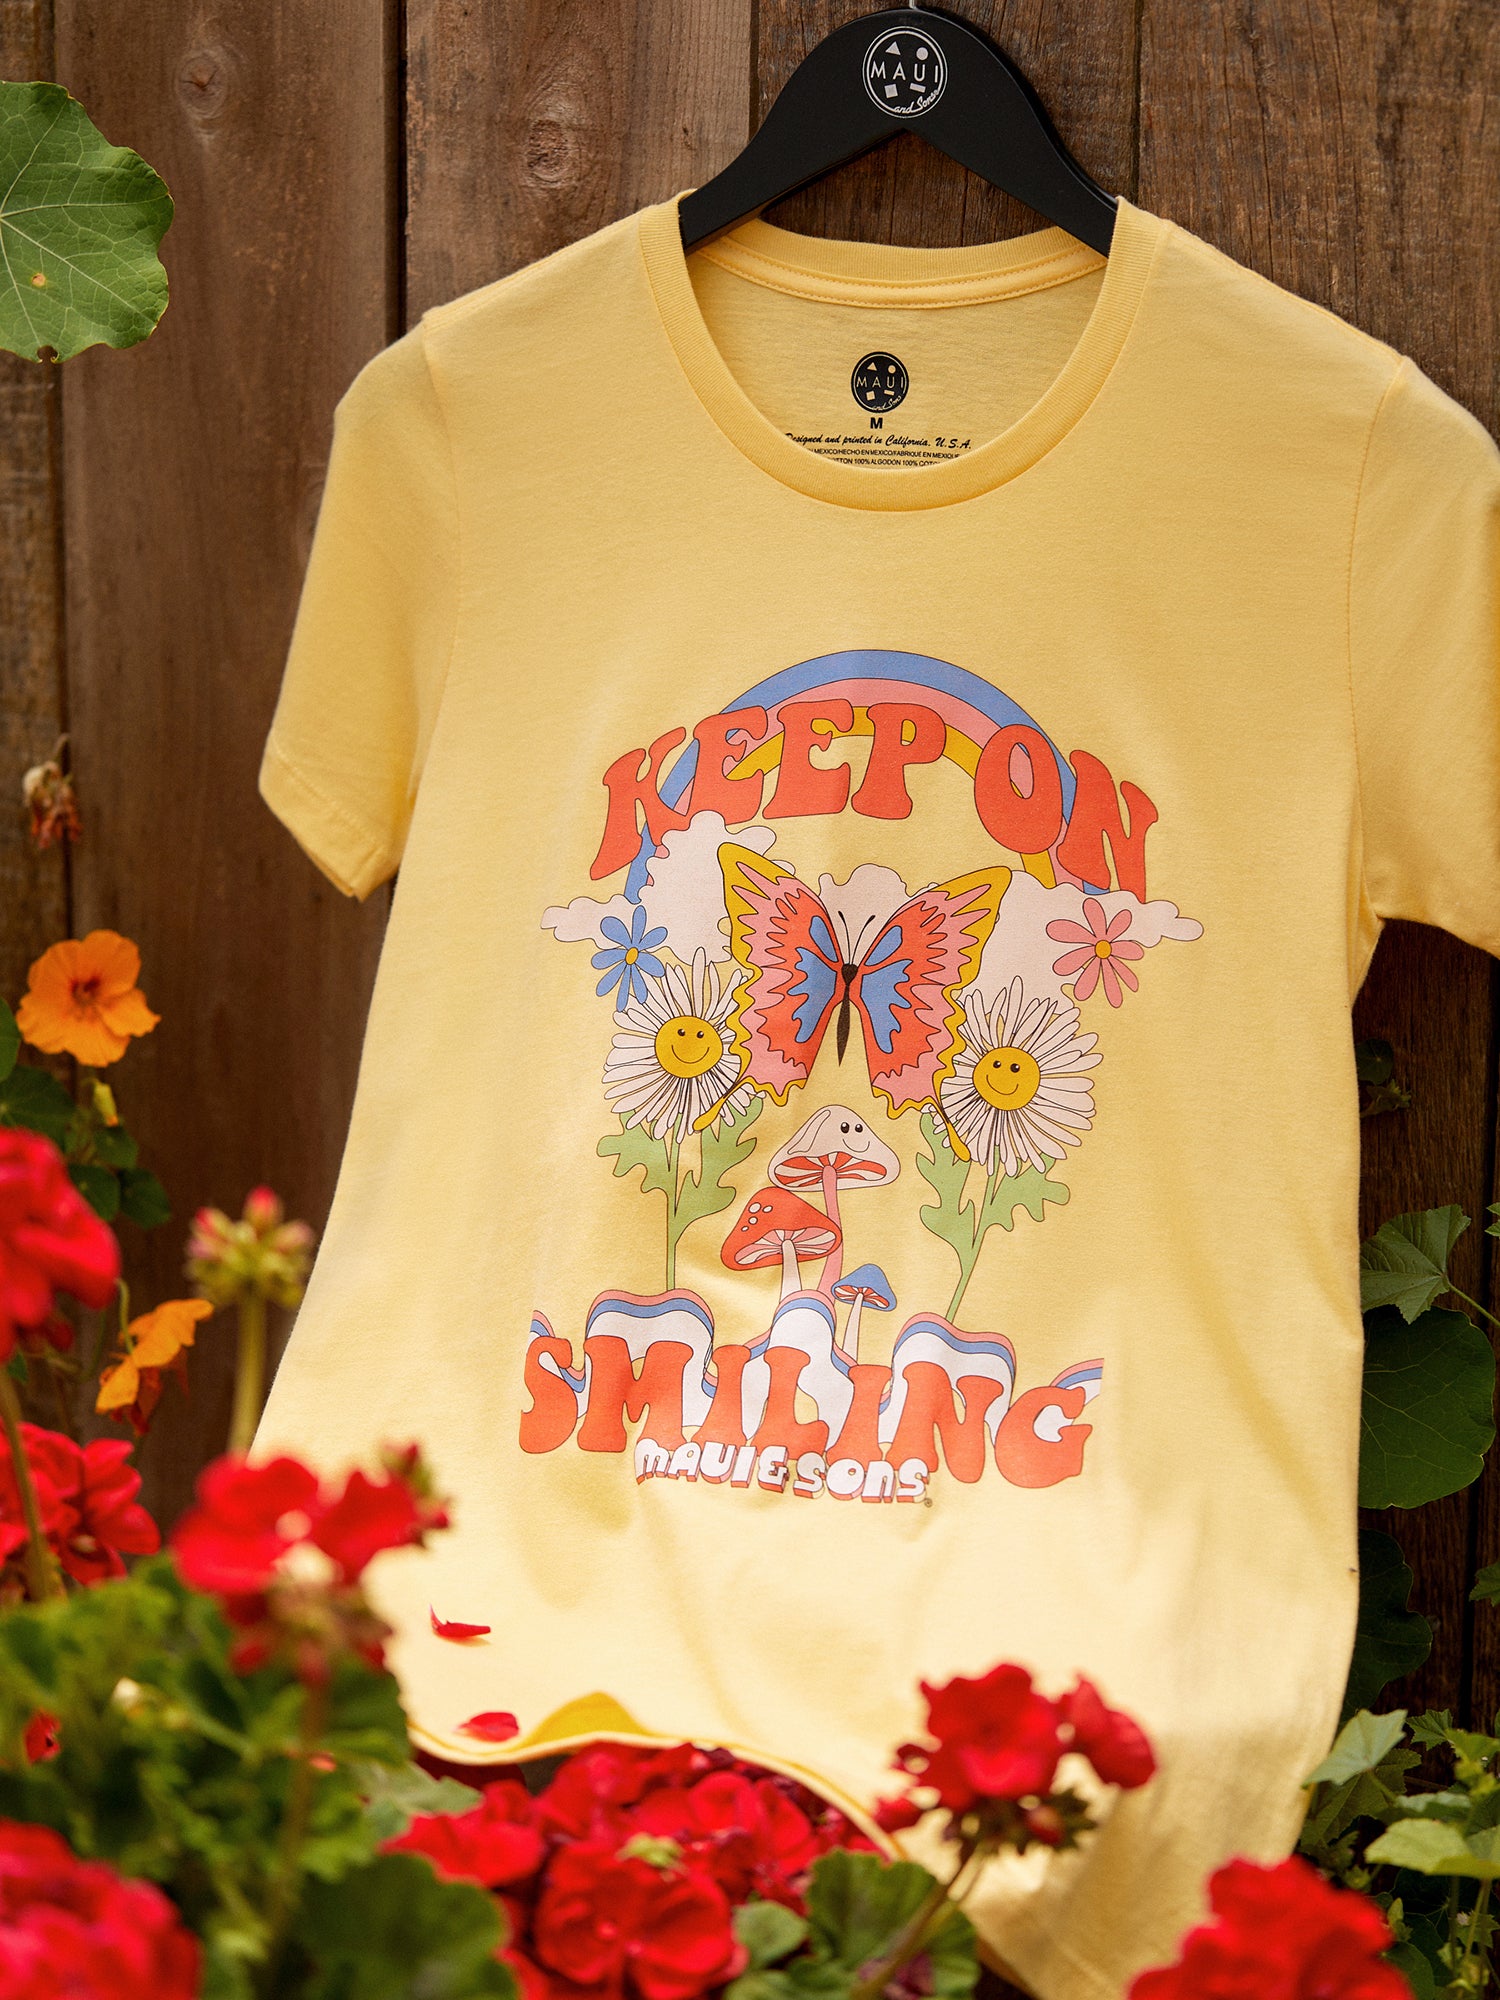 Keep on Smiling T-Shirt